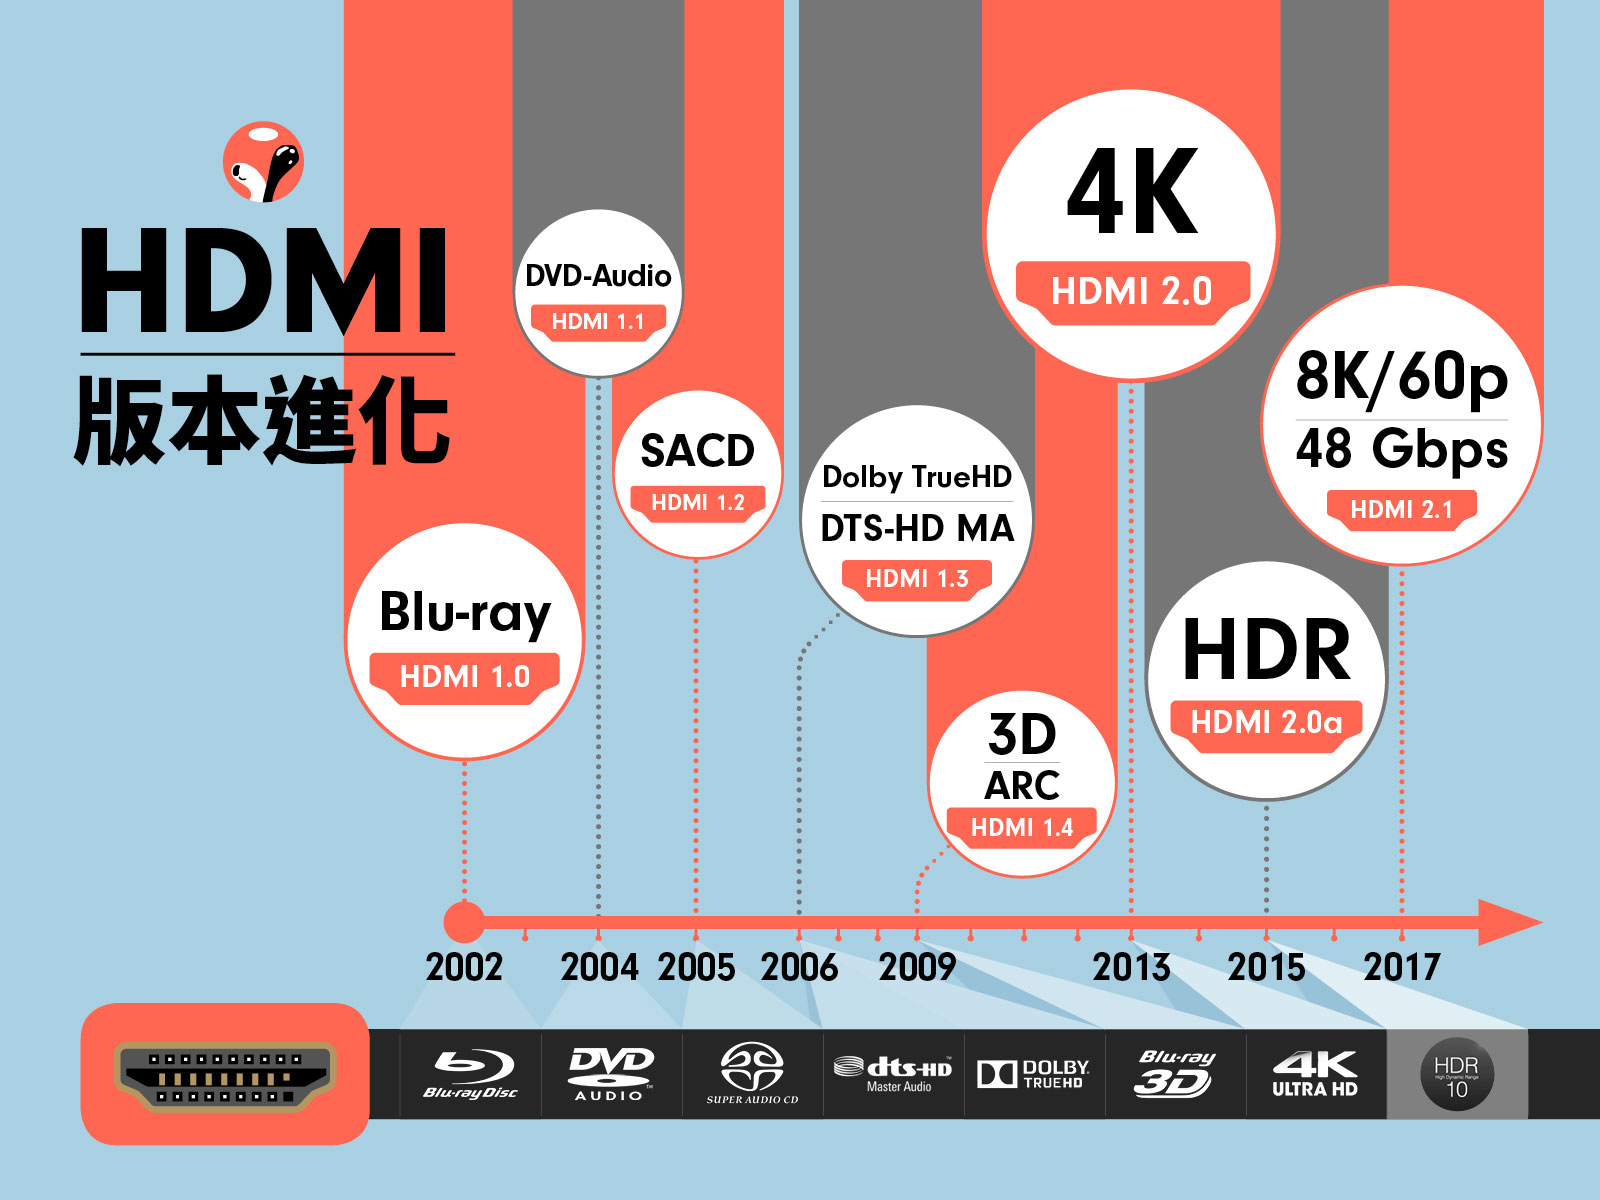 differences between hdmi versions